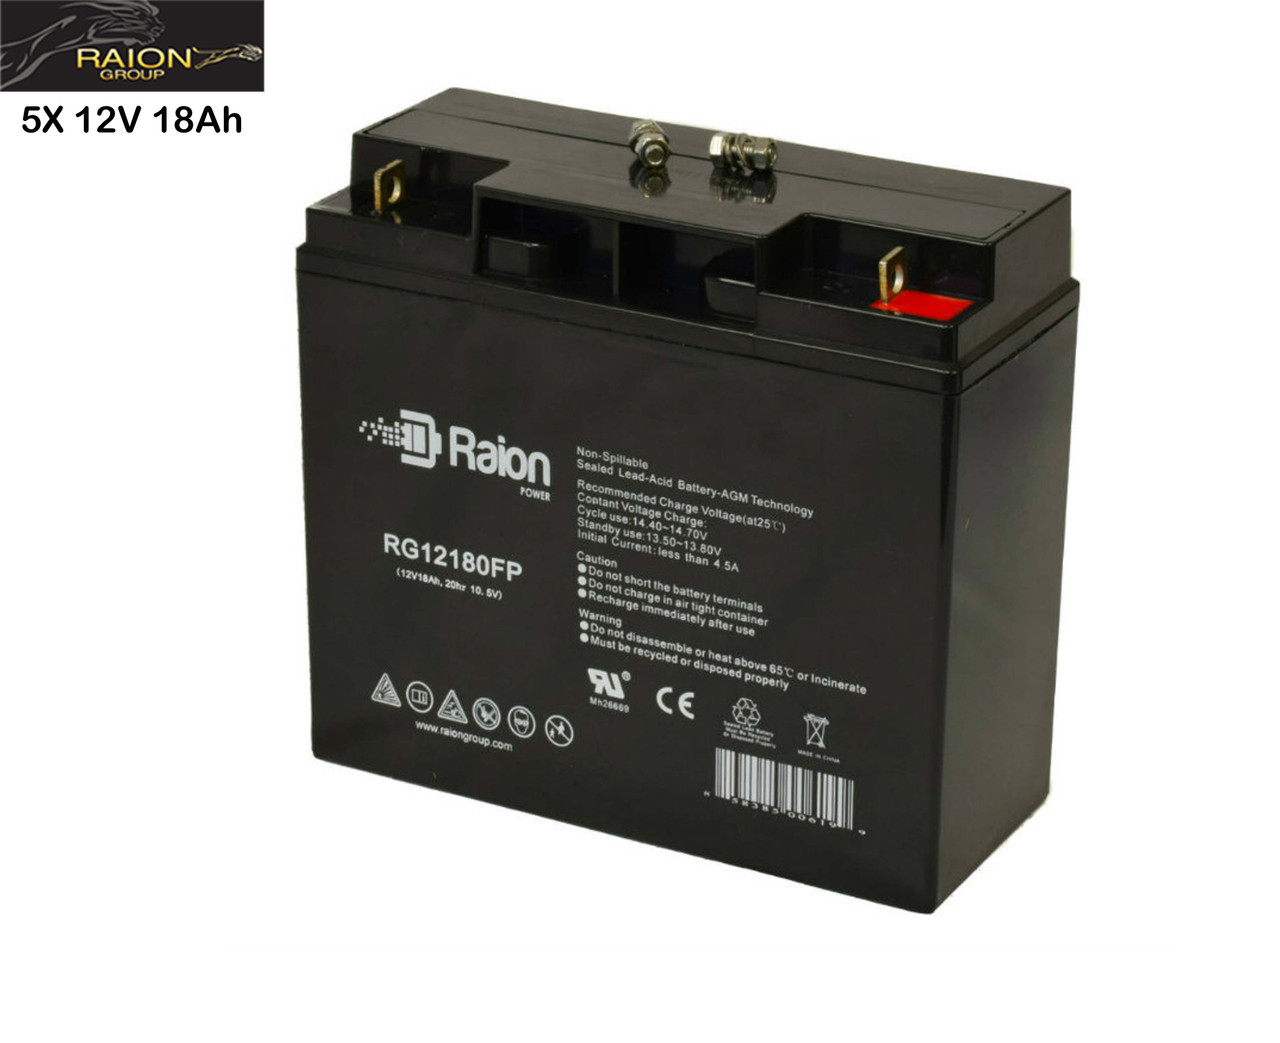 Raion Power Replacement 12V 18Ah Battery for Kypro Striker - 5 Pack